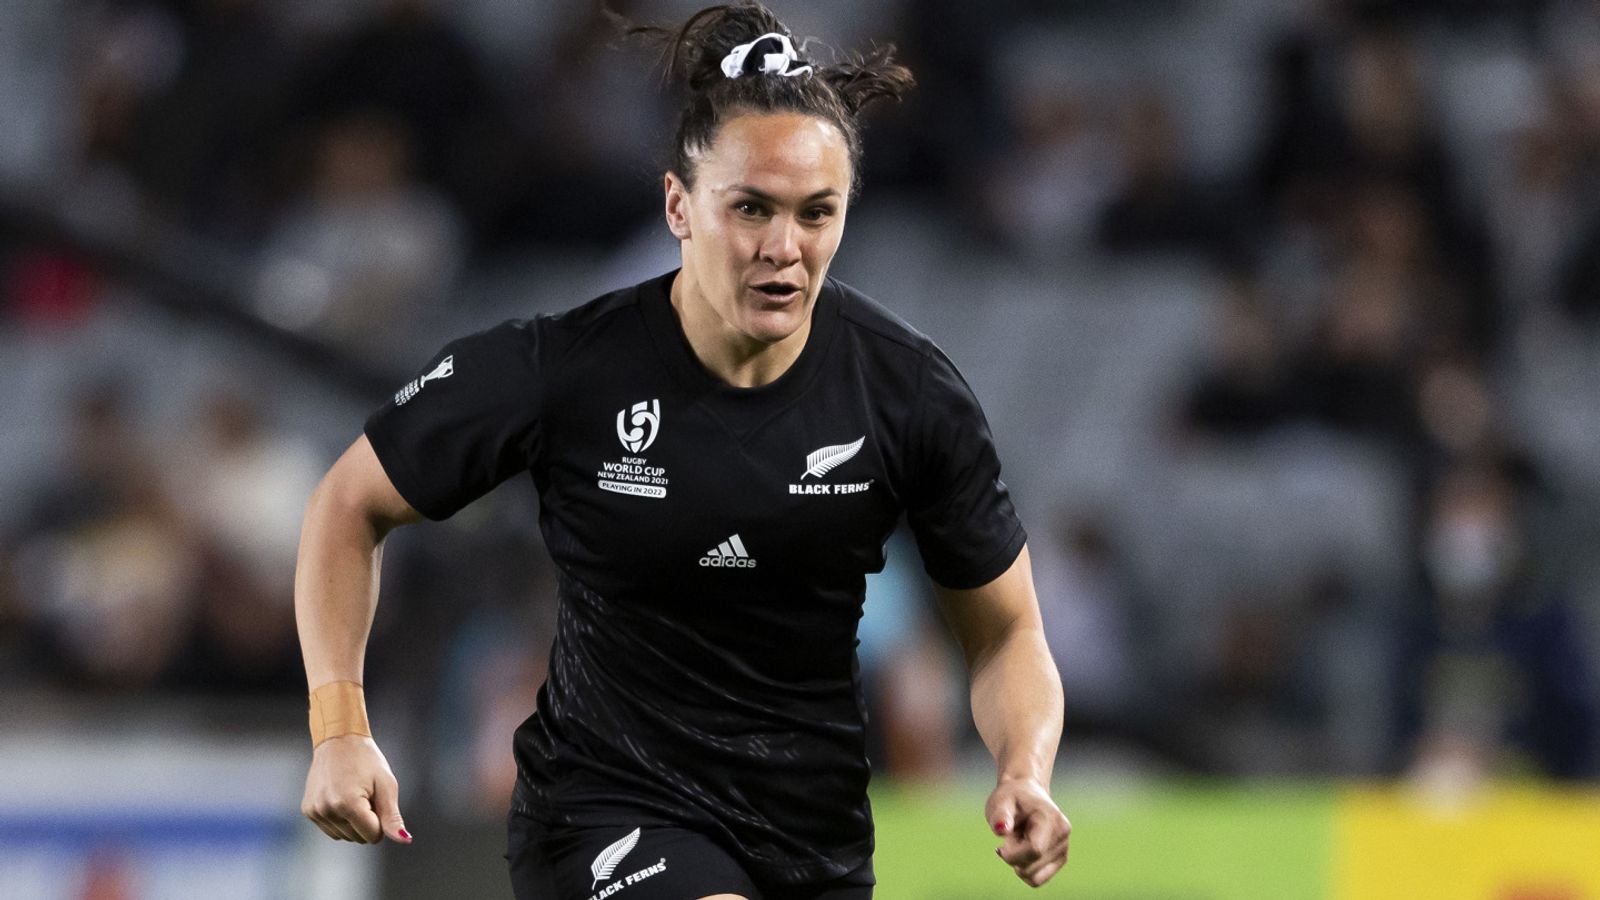 new-zealand-55-3-wales-black-ferns-knock-wales-out-of-rugby-world-cup-at-quarter-final-stage